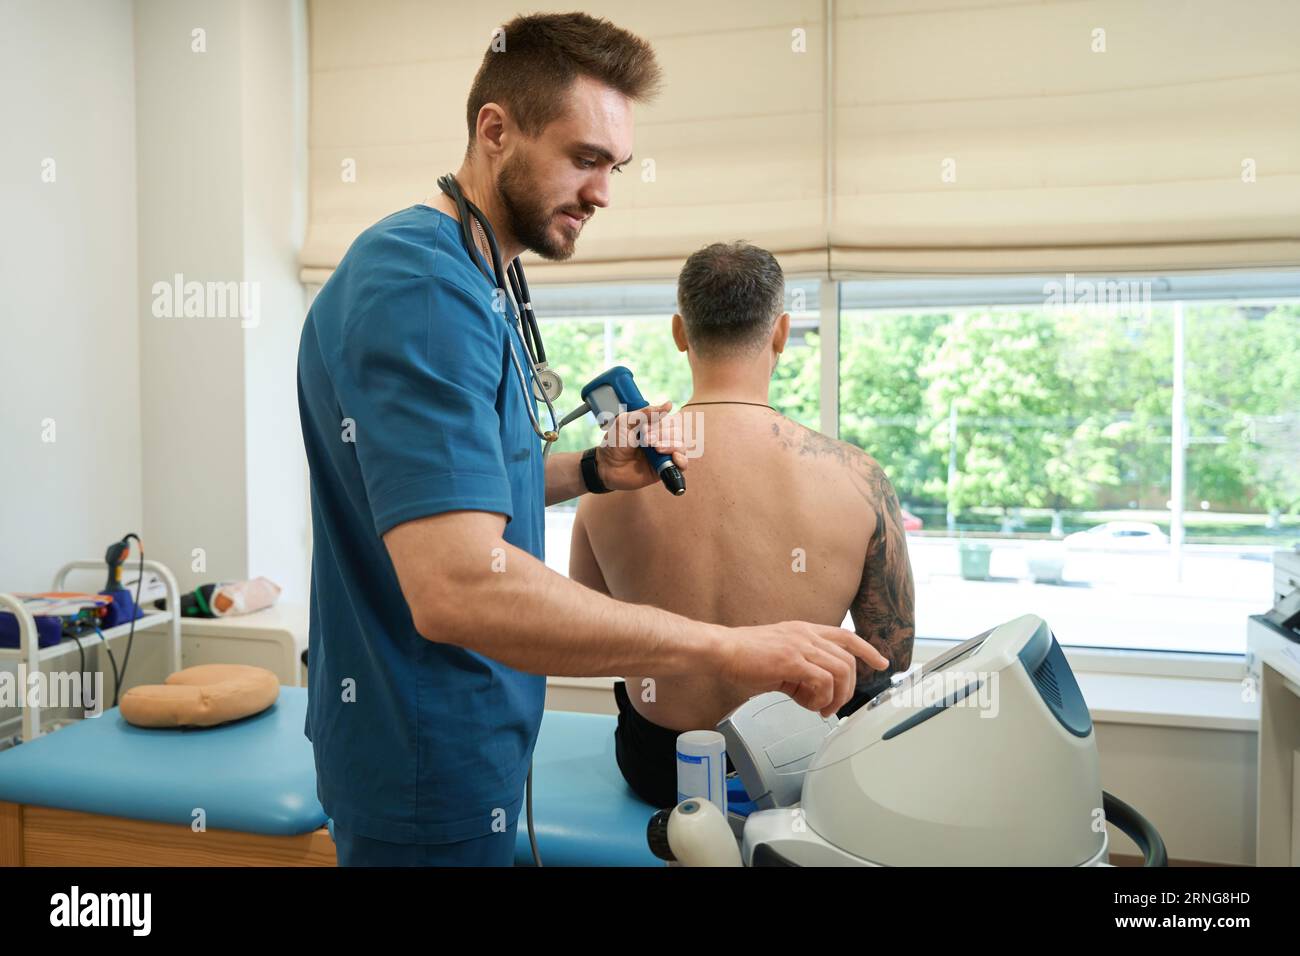 Experienced physical therapist preparing adult man for ESWT session Stock Photo